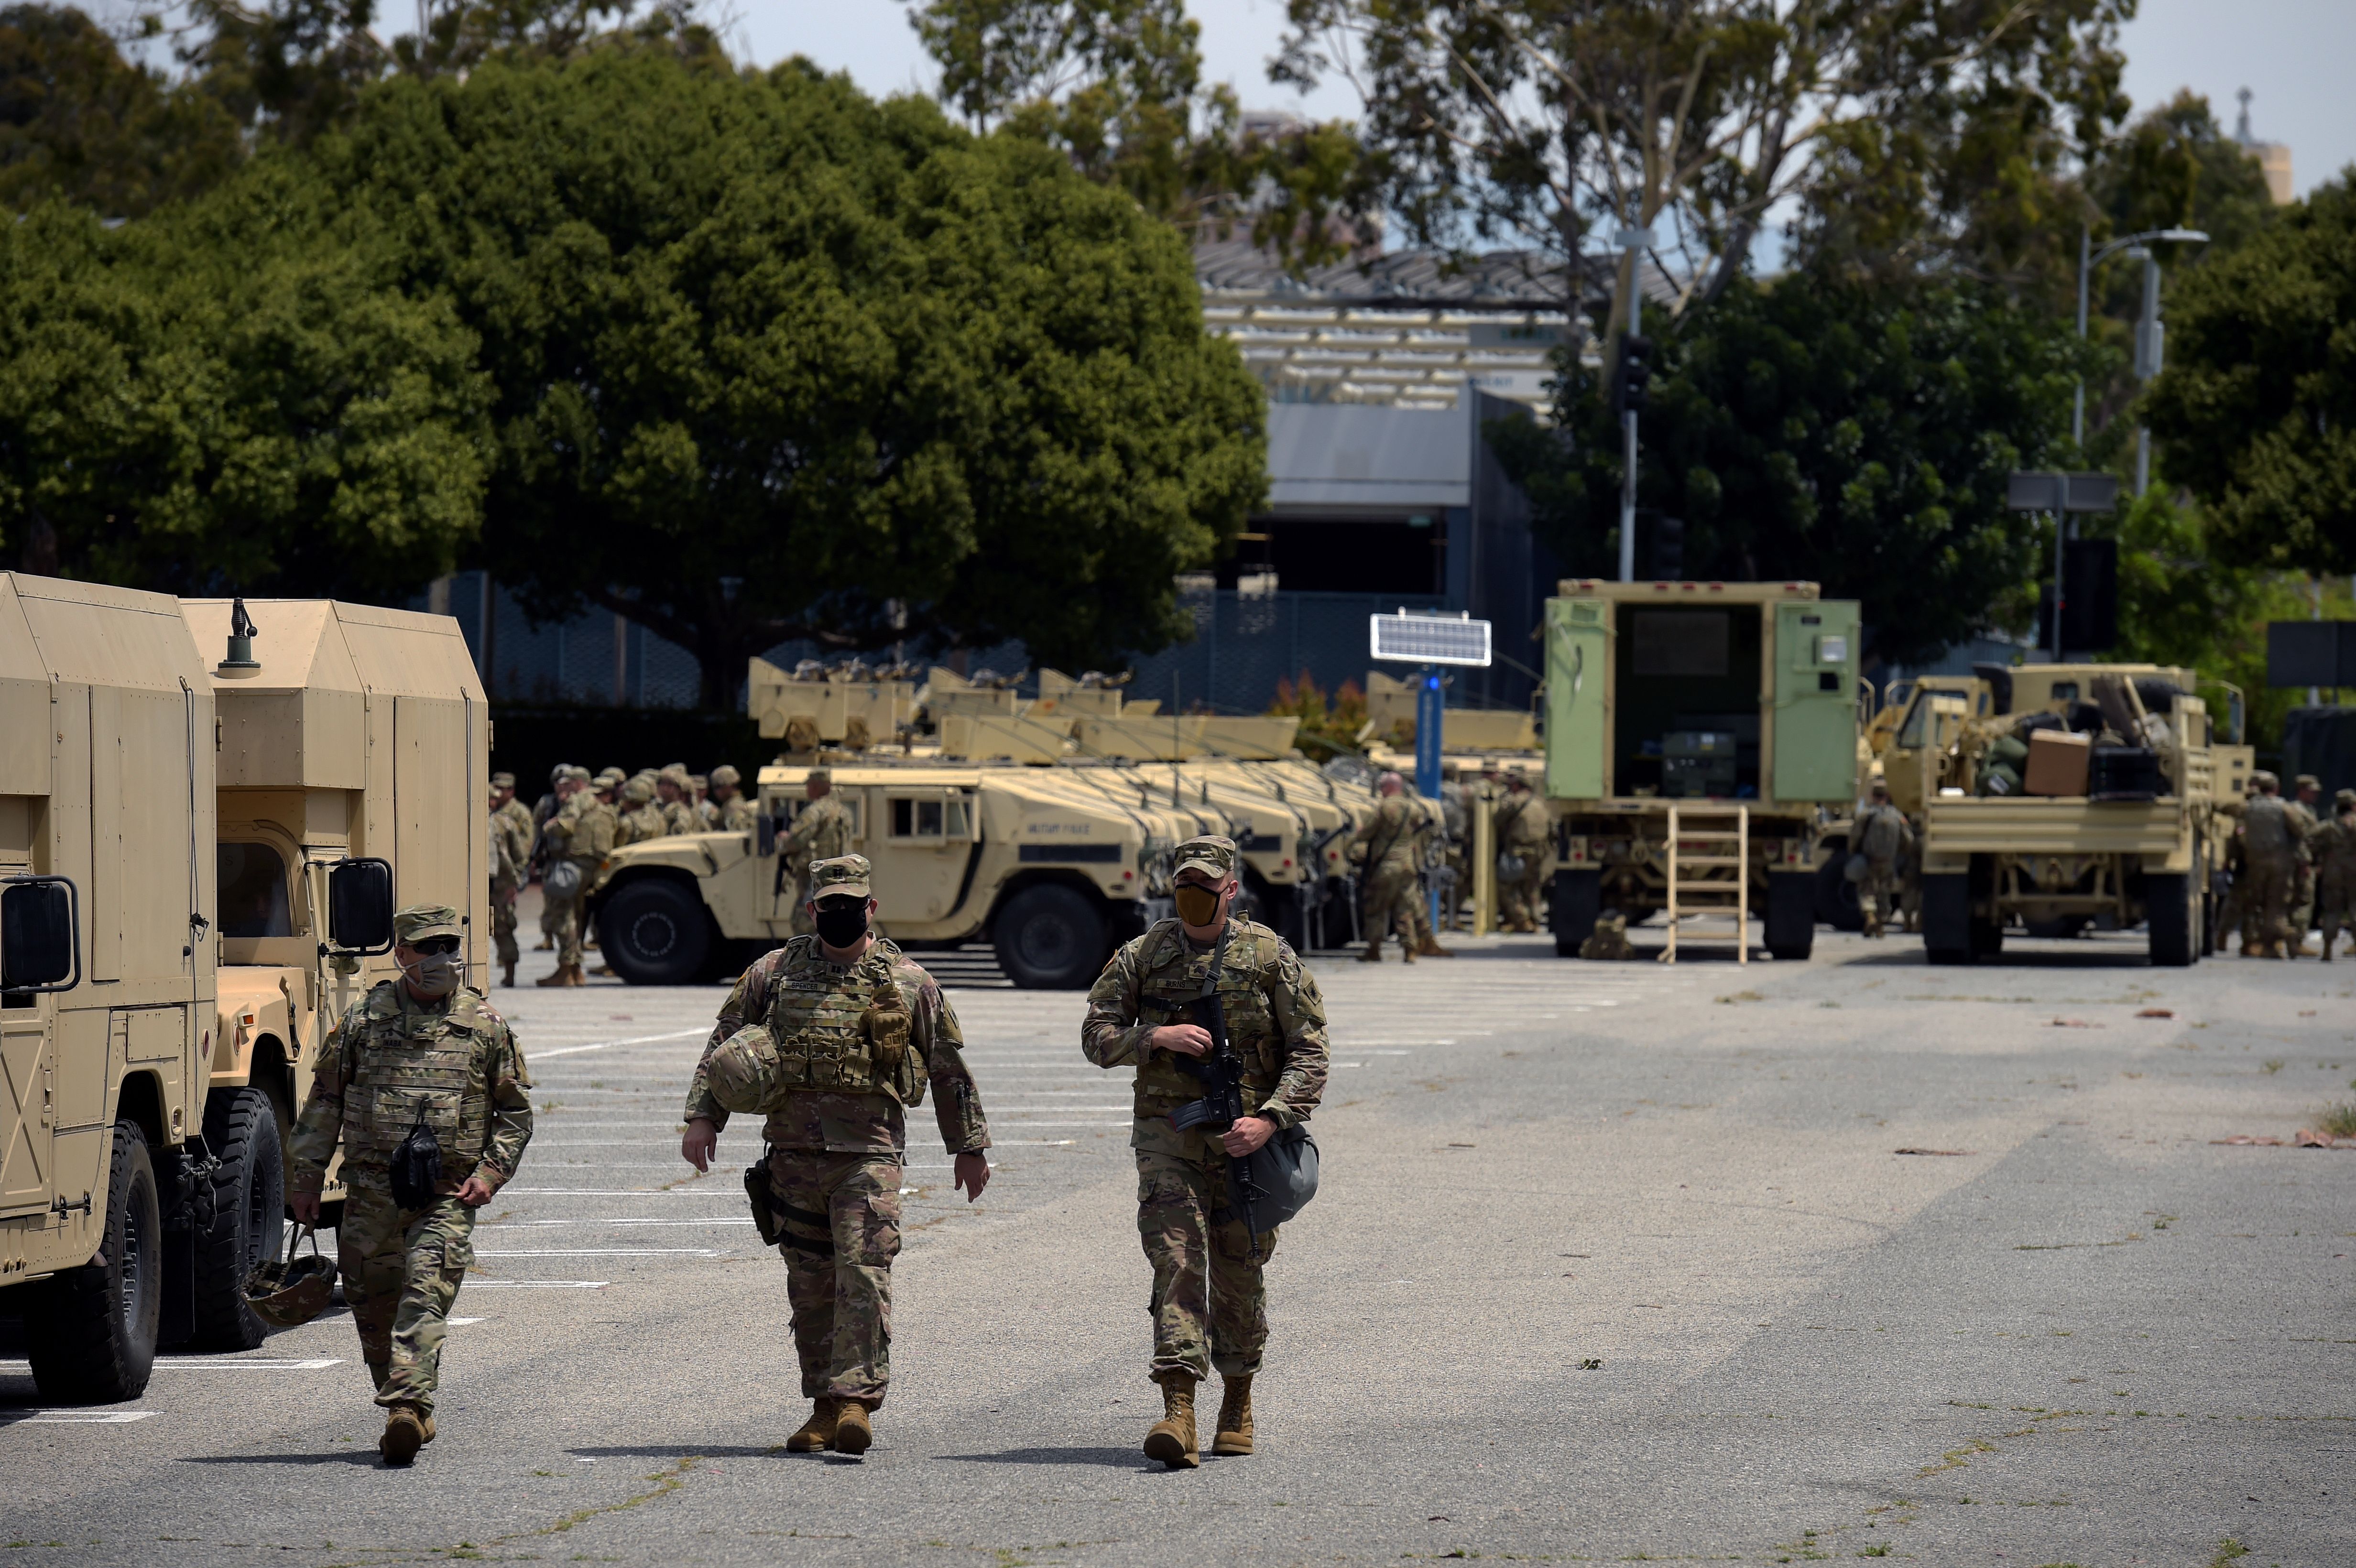 California National Guard soldiers walk in a parking lot after people protested in Los Angeles on May 31.